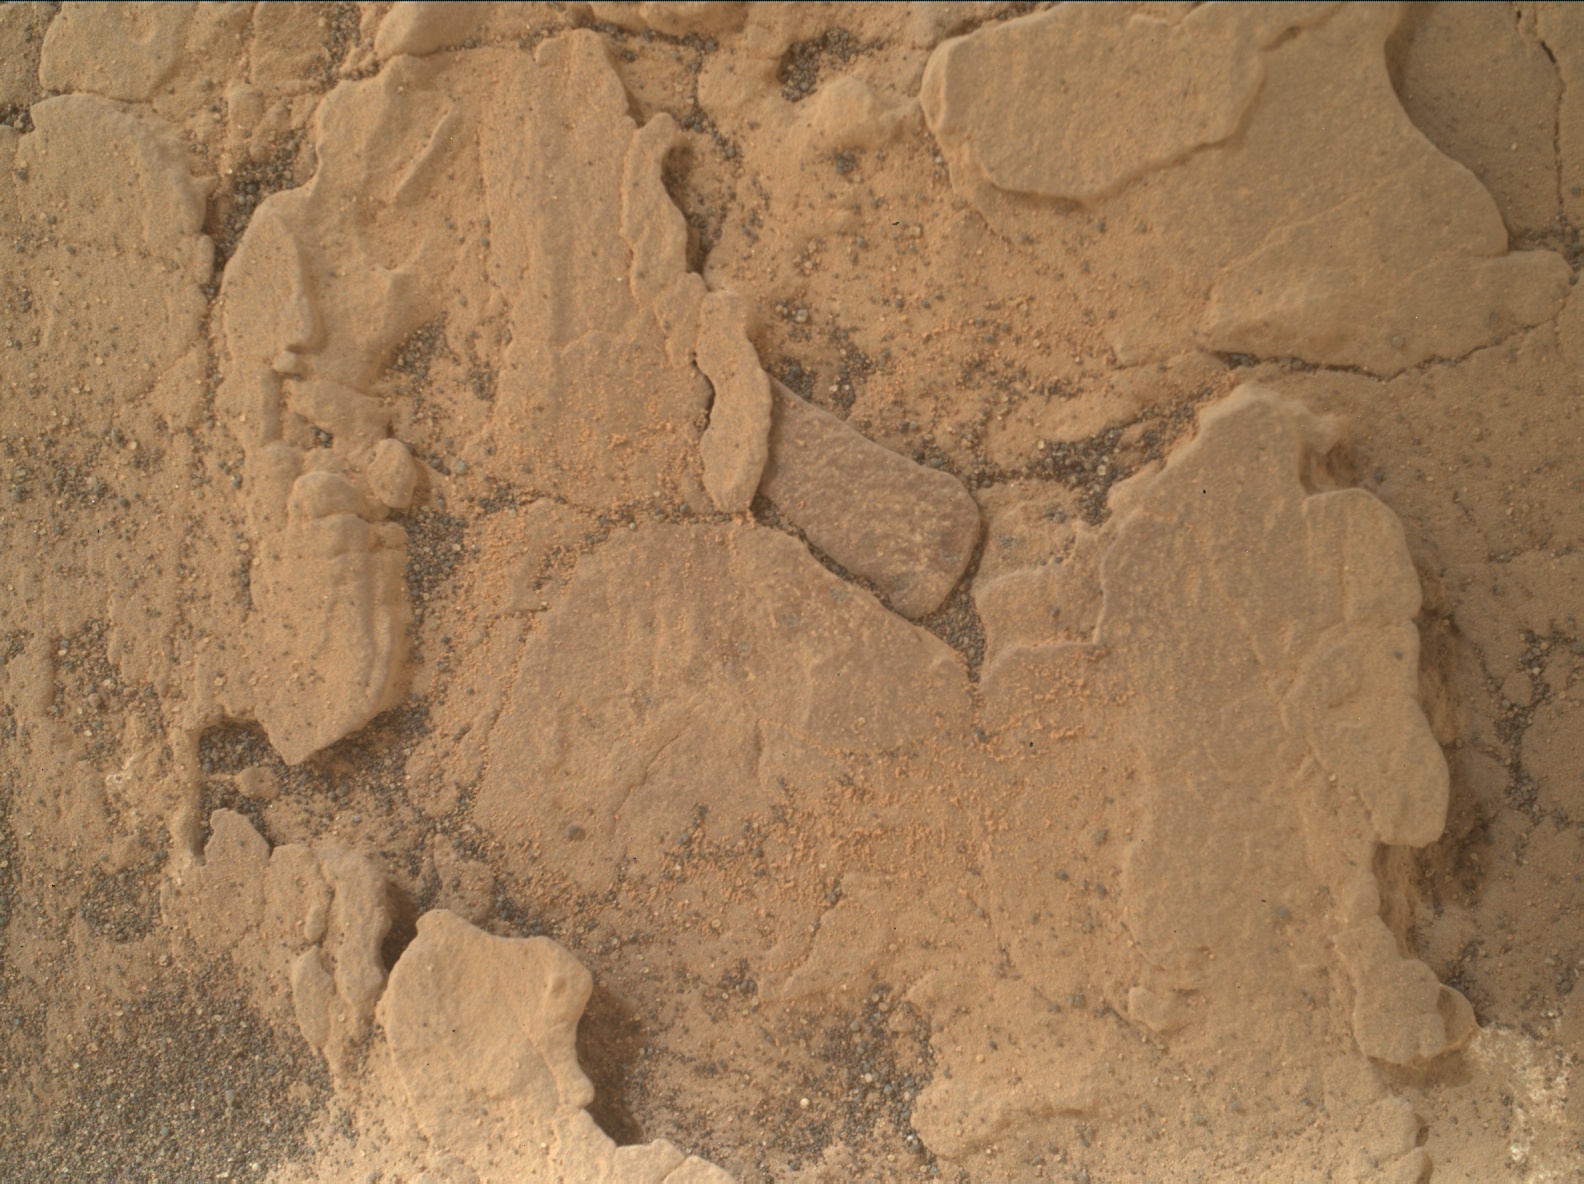 Nasa's Mars rover Curiosity acquired this image using its Mars Hand Lens Imager (MAHLI) on Sol 2461